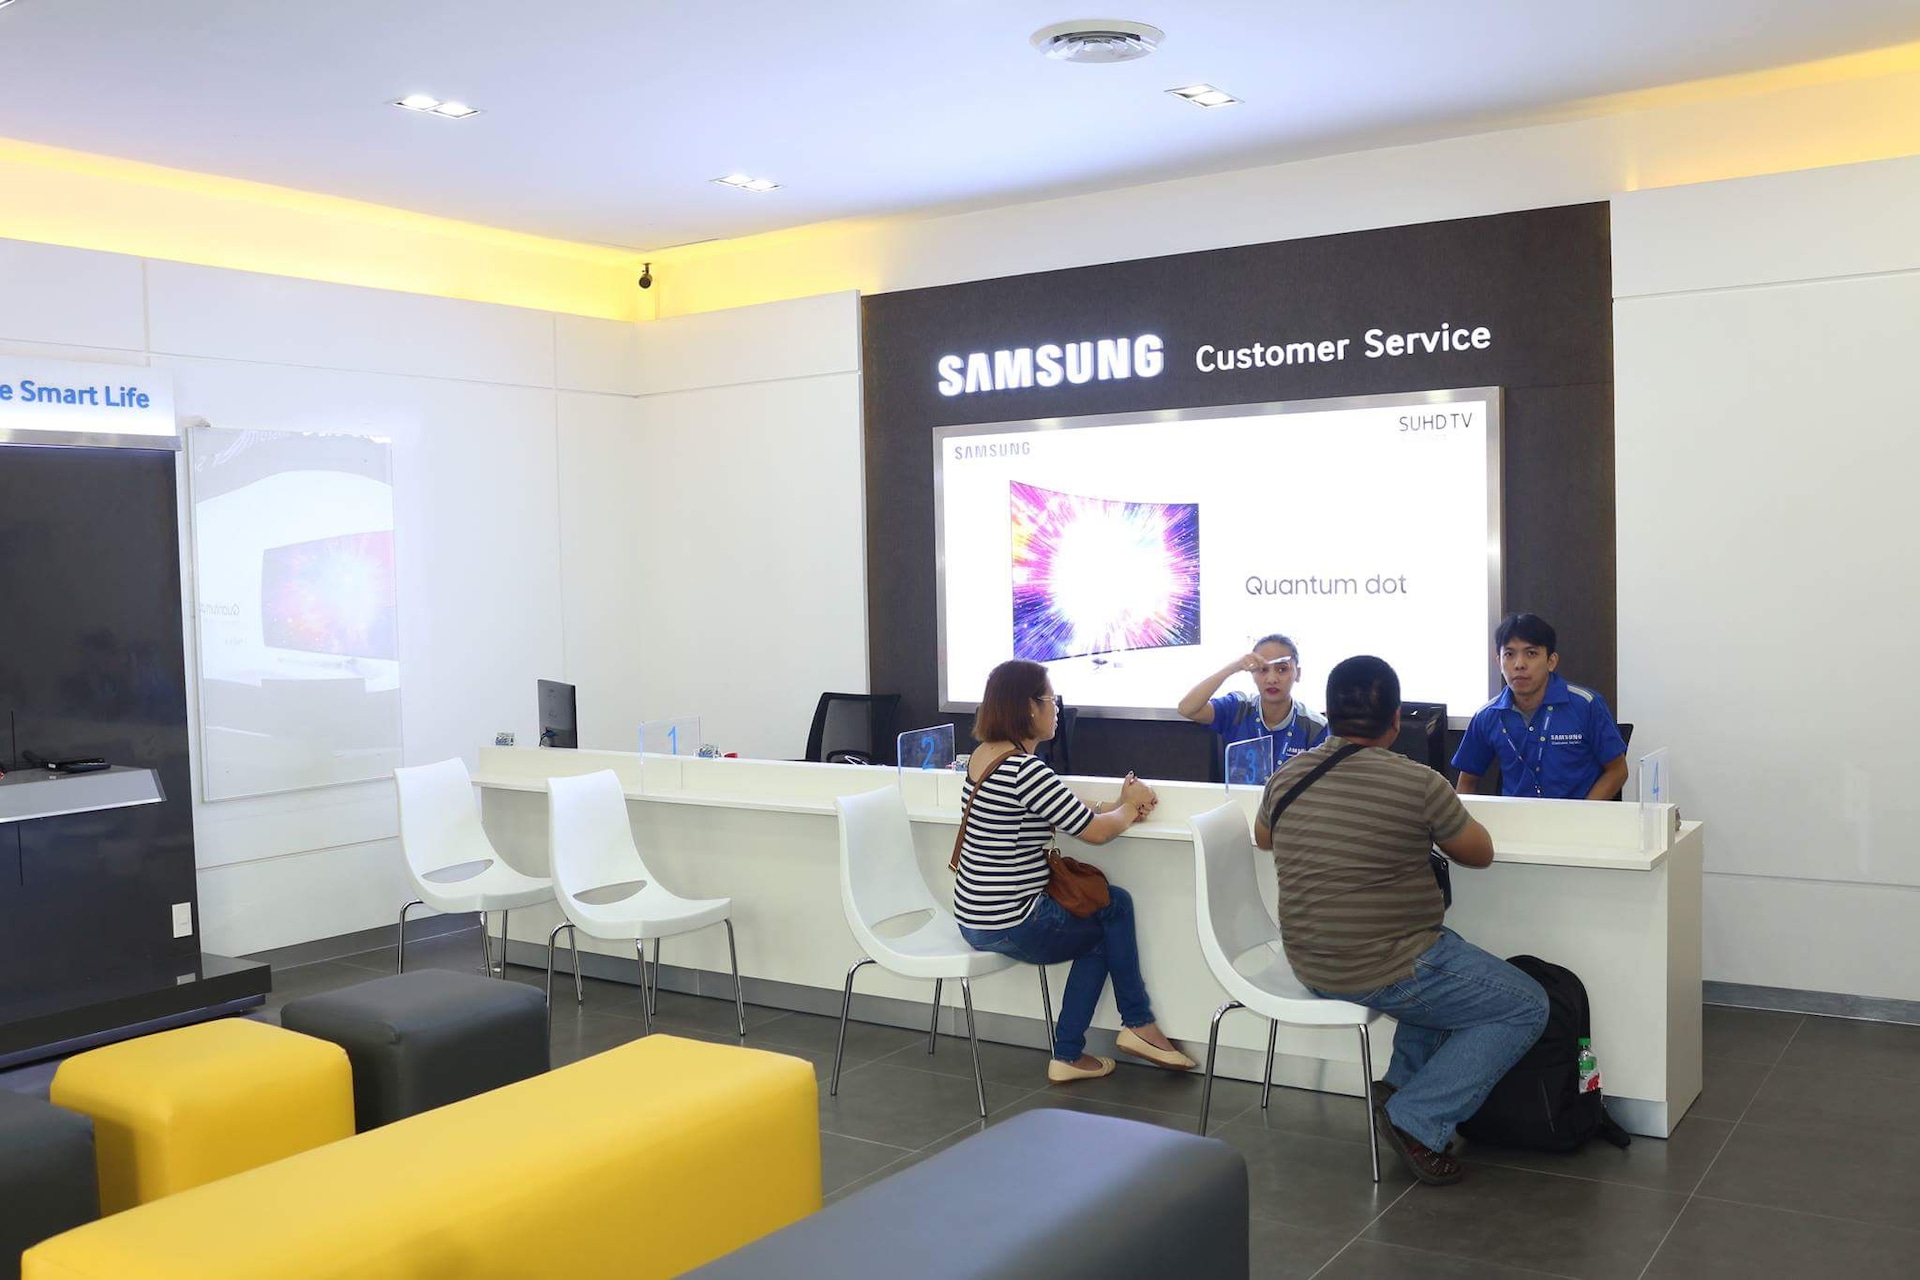 Samsung Newly Renovated Service Center: Chronicles Works and Services Inc. | Samsung ...2048 x 1365